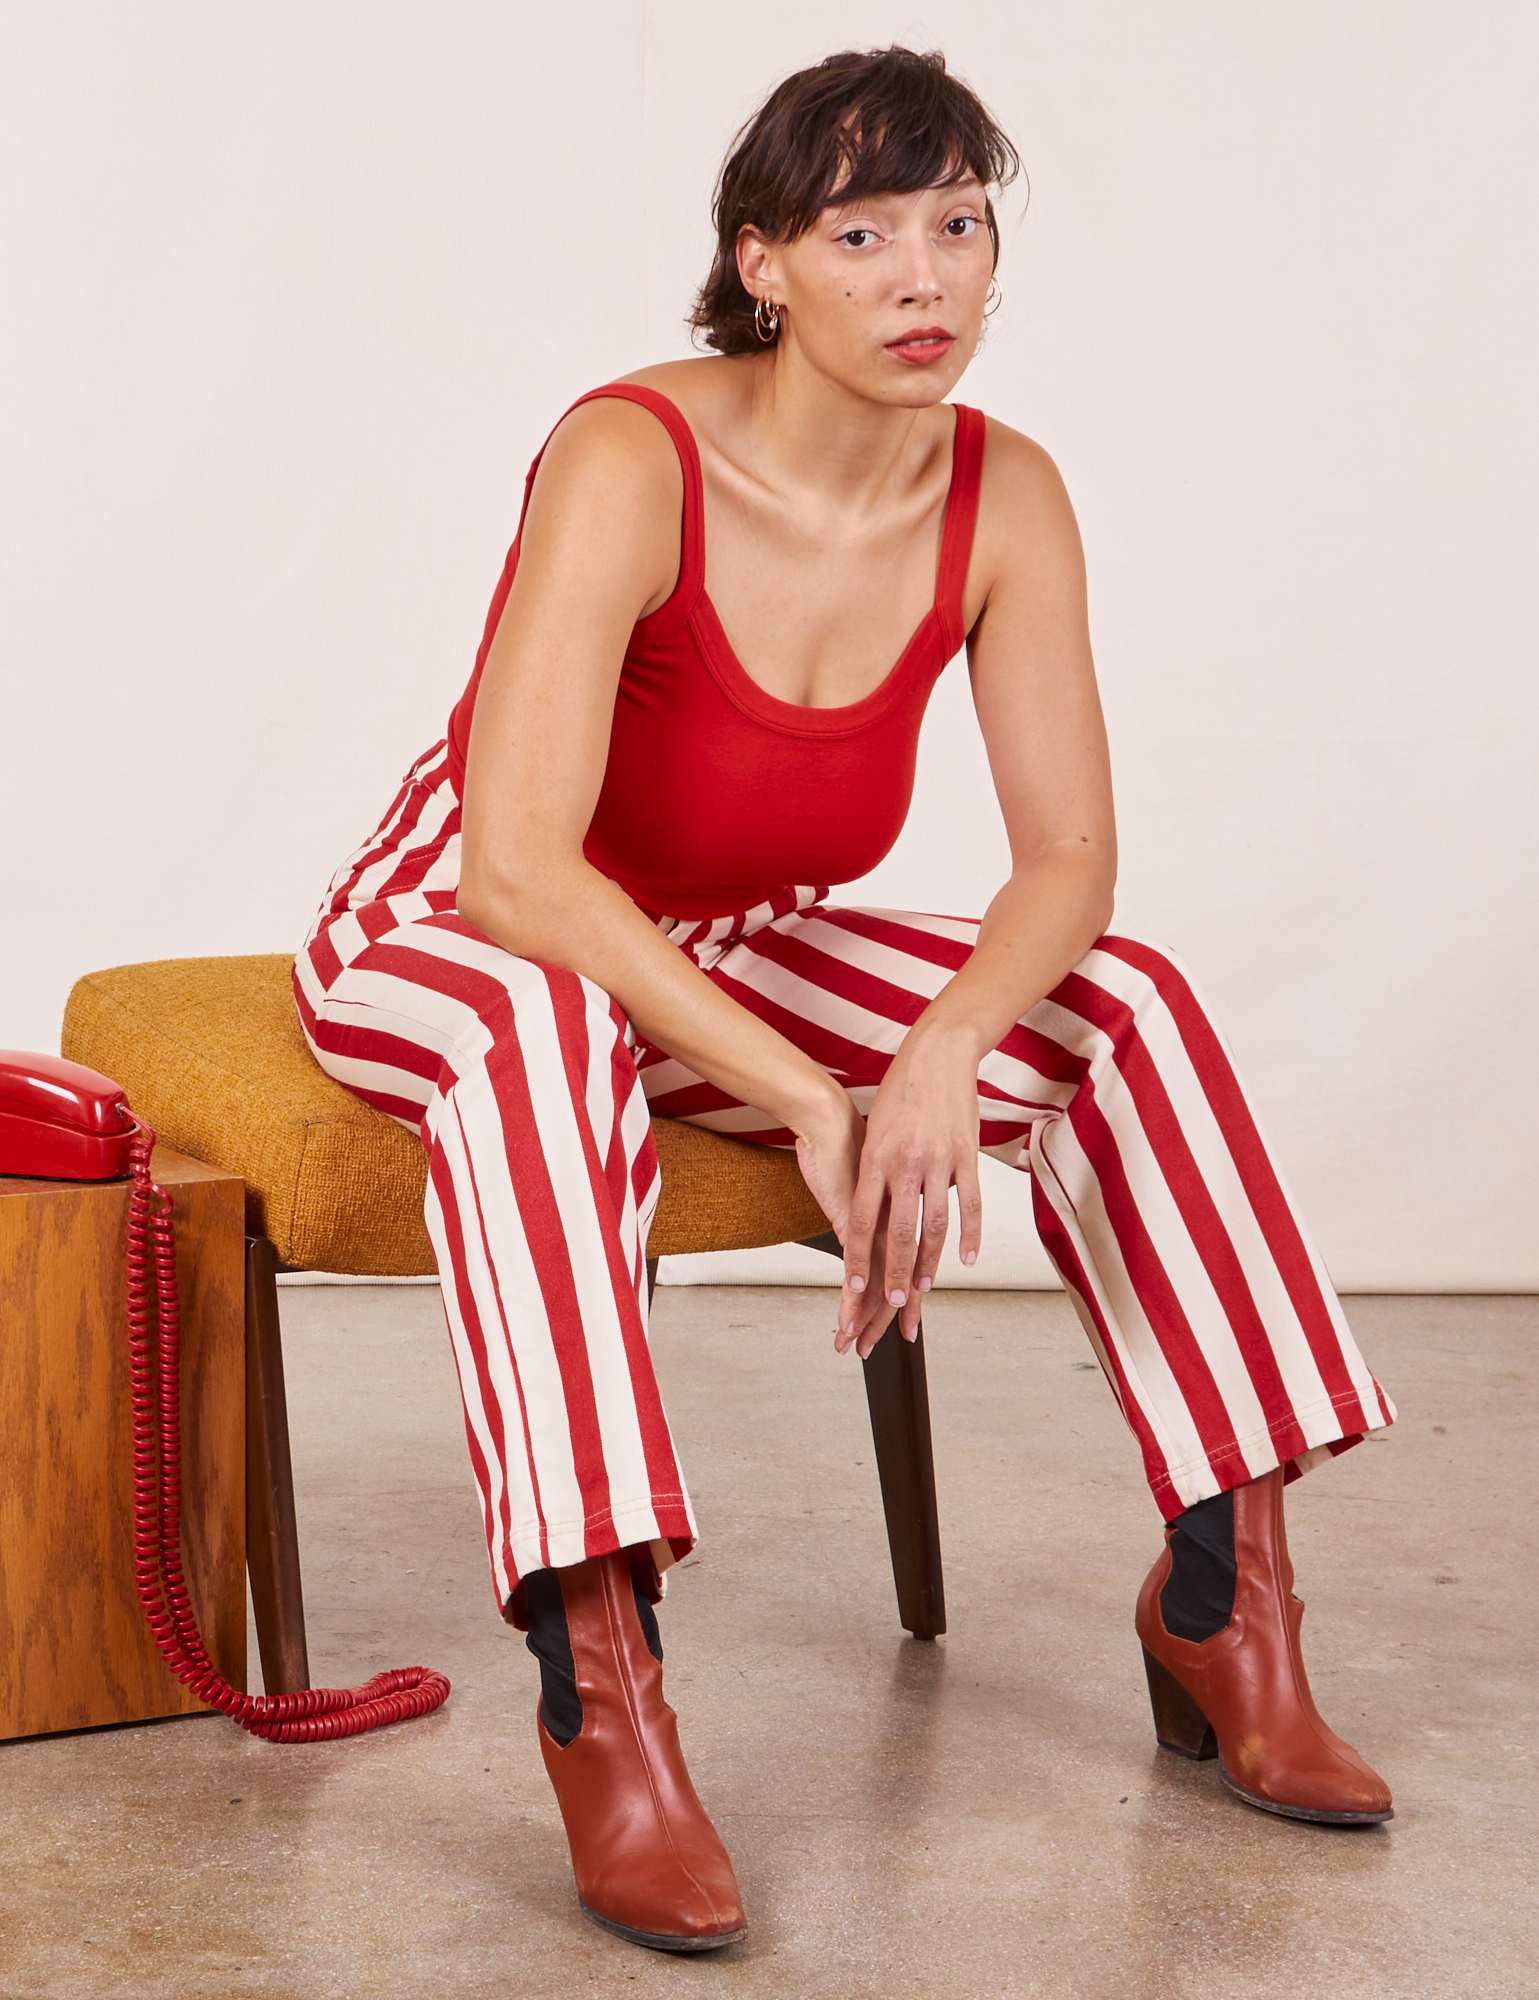 Tiara is wearing Work Pants in Cherry Stripe and mustang red Cropped Cami